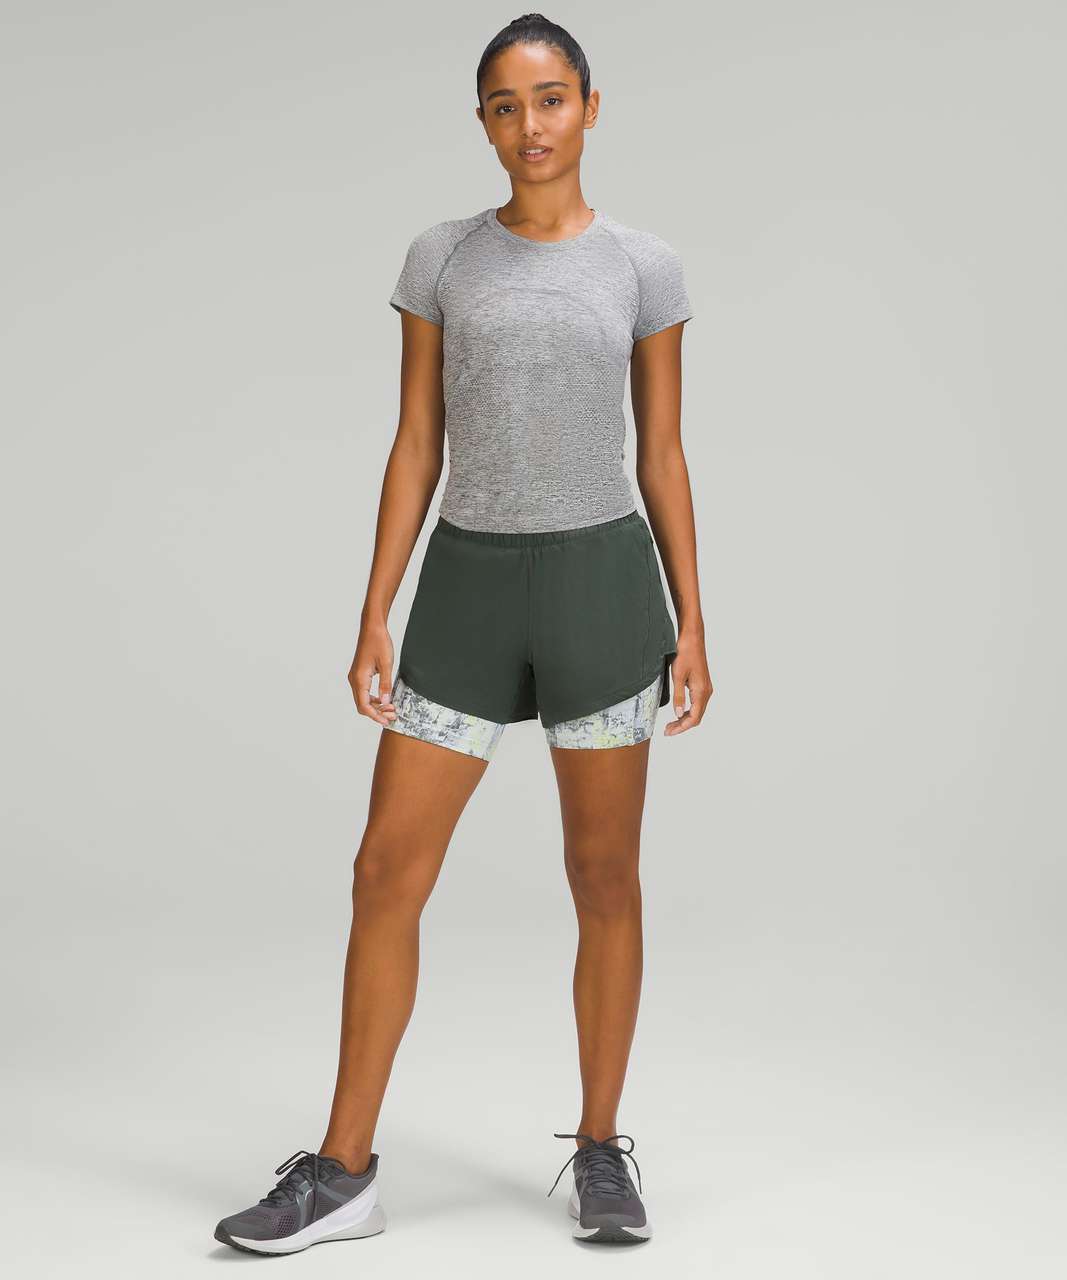 Lululemon Track That 2-in-1 High-Rise Short 6" - Smoked Spruce / Cinder Grain Smoked Spruce Multi